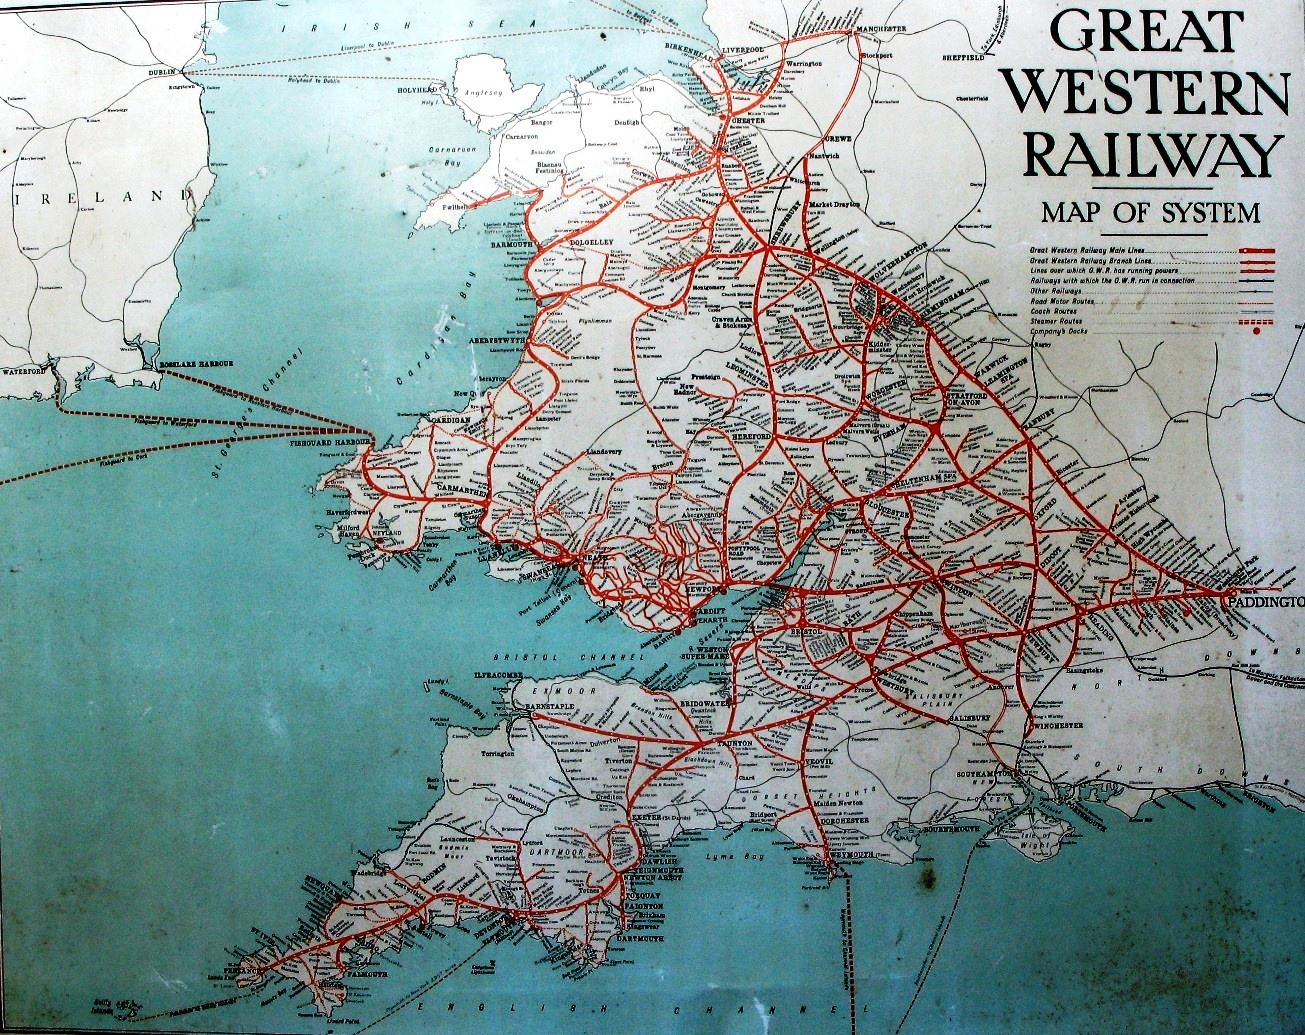 GWR network map c1930 - enlarge